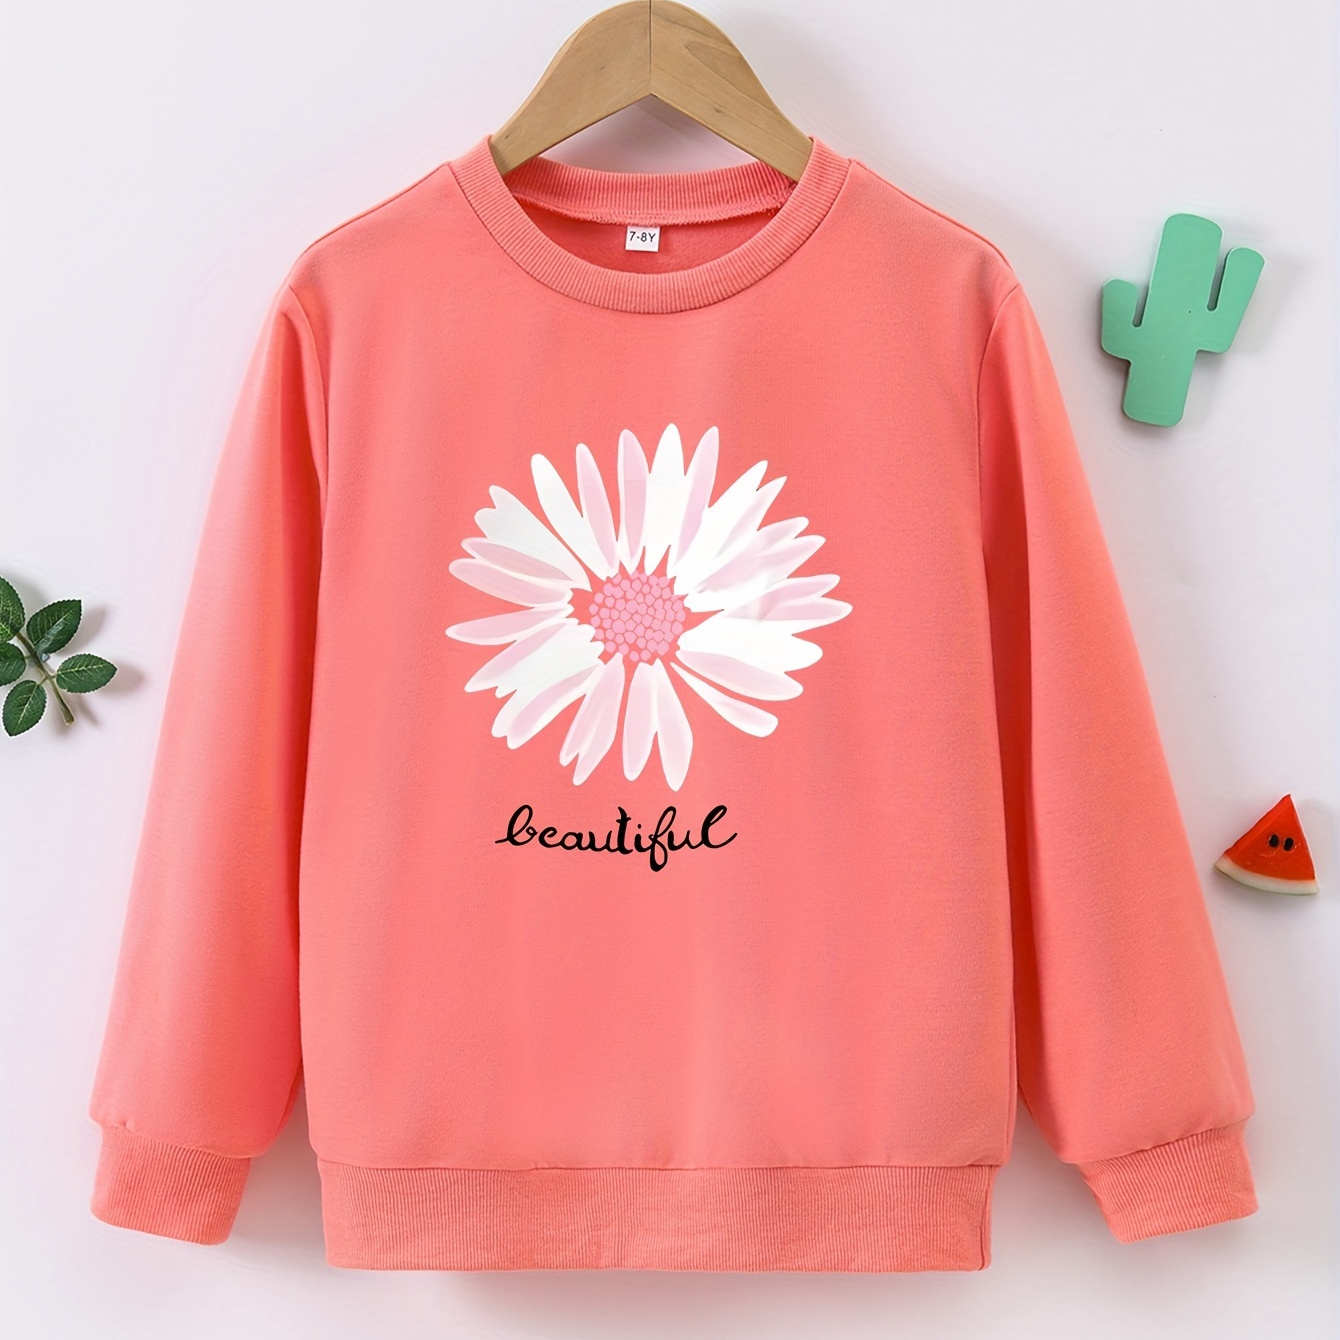 

Girls Beautiful Daisy Print Pullover Sweatshirt, Casual Thin Long Sleeve Sports Tops Sweater For Fall/ Spring, Girl Clothing